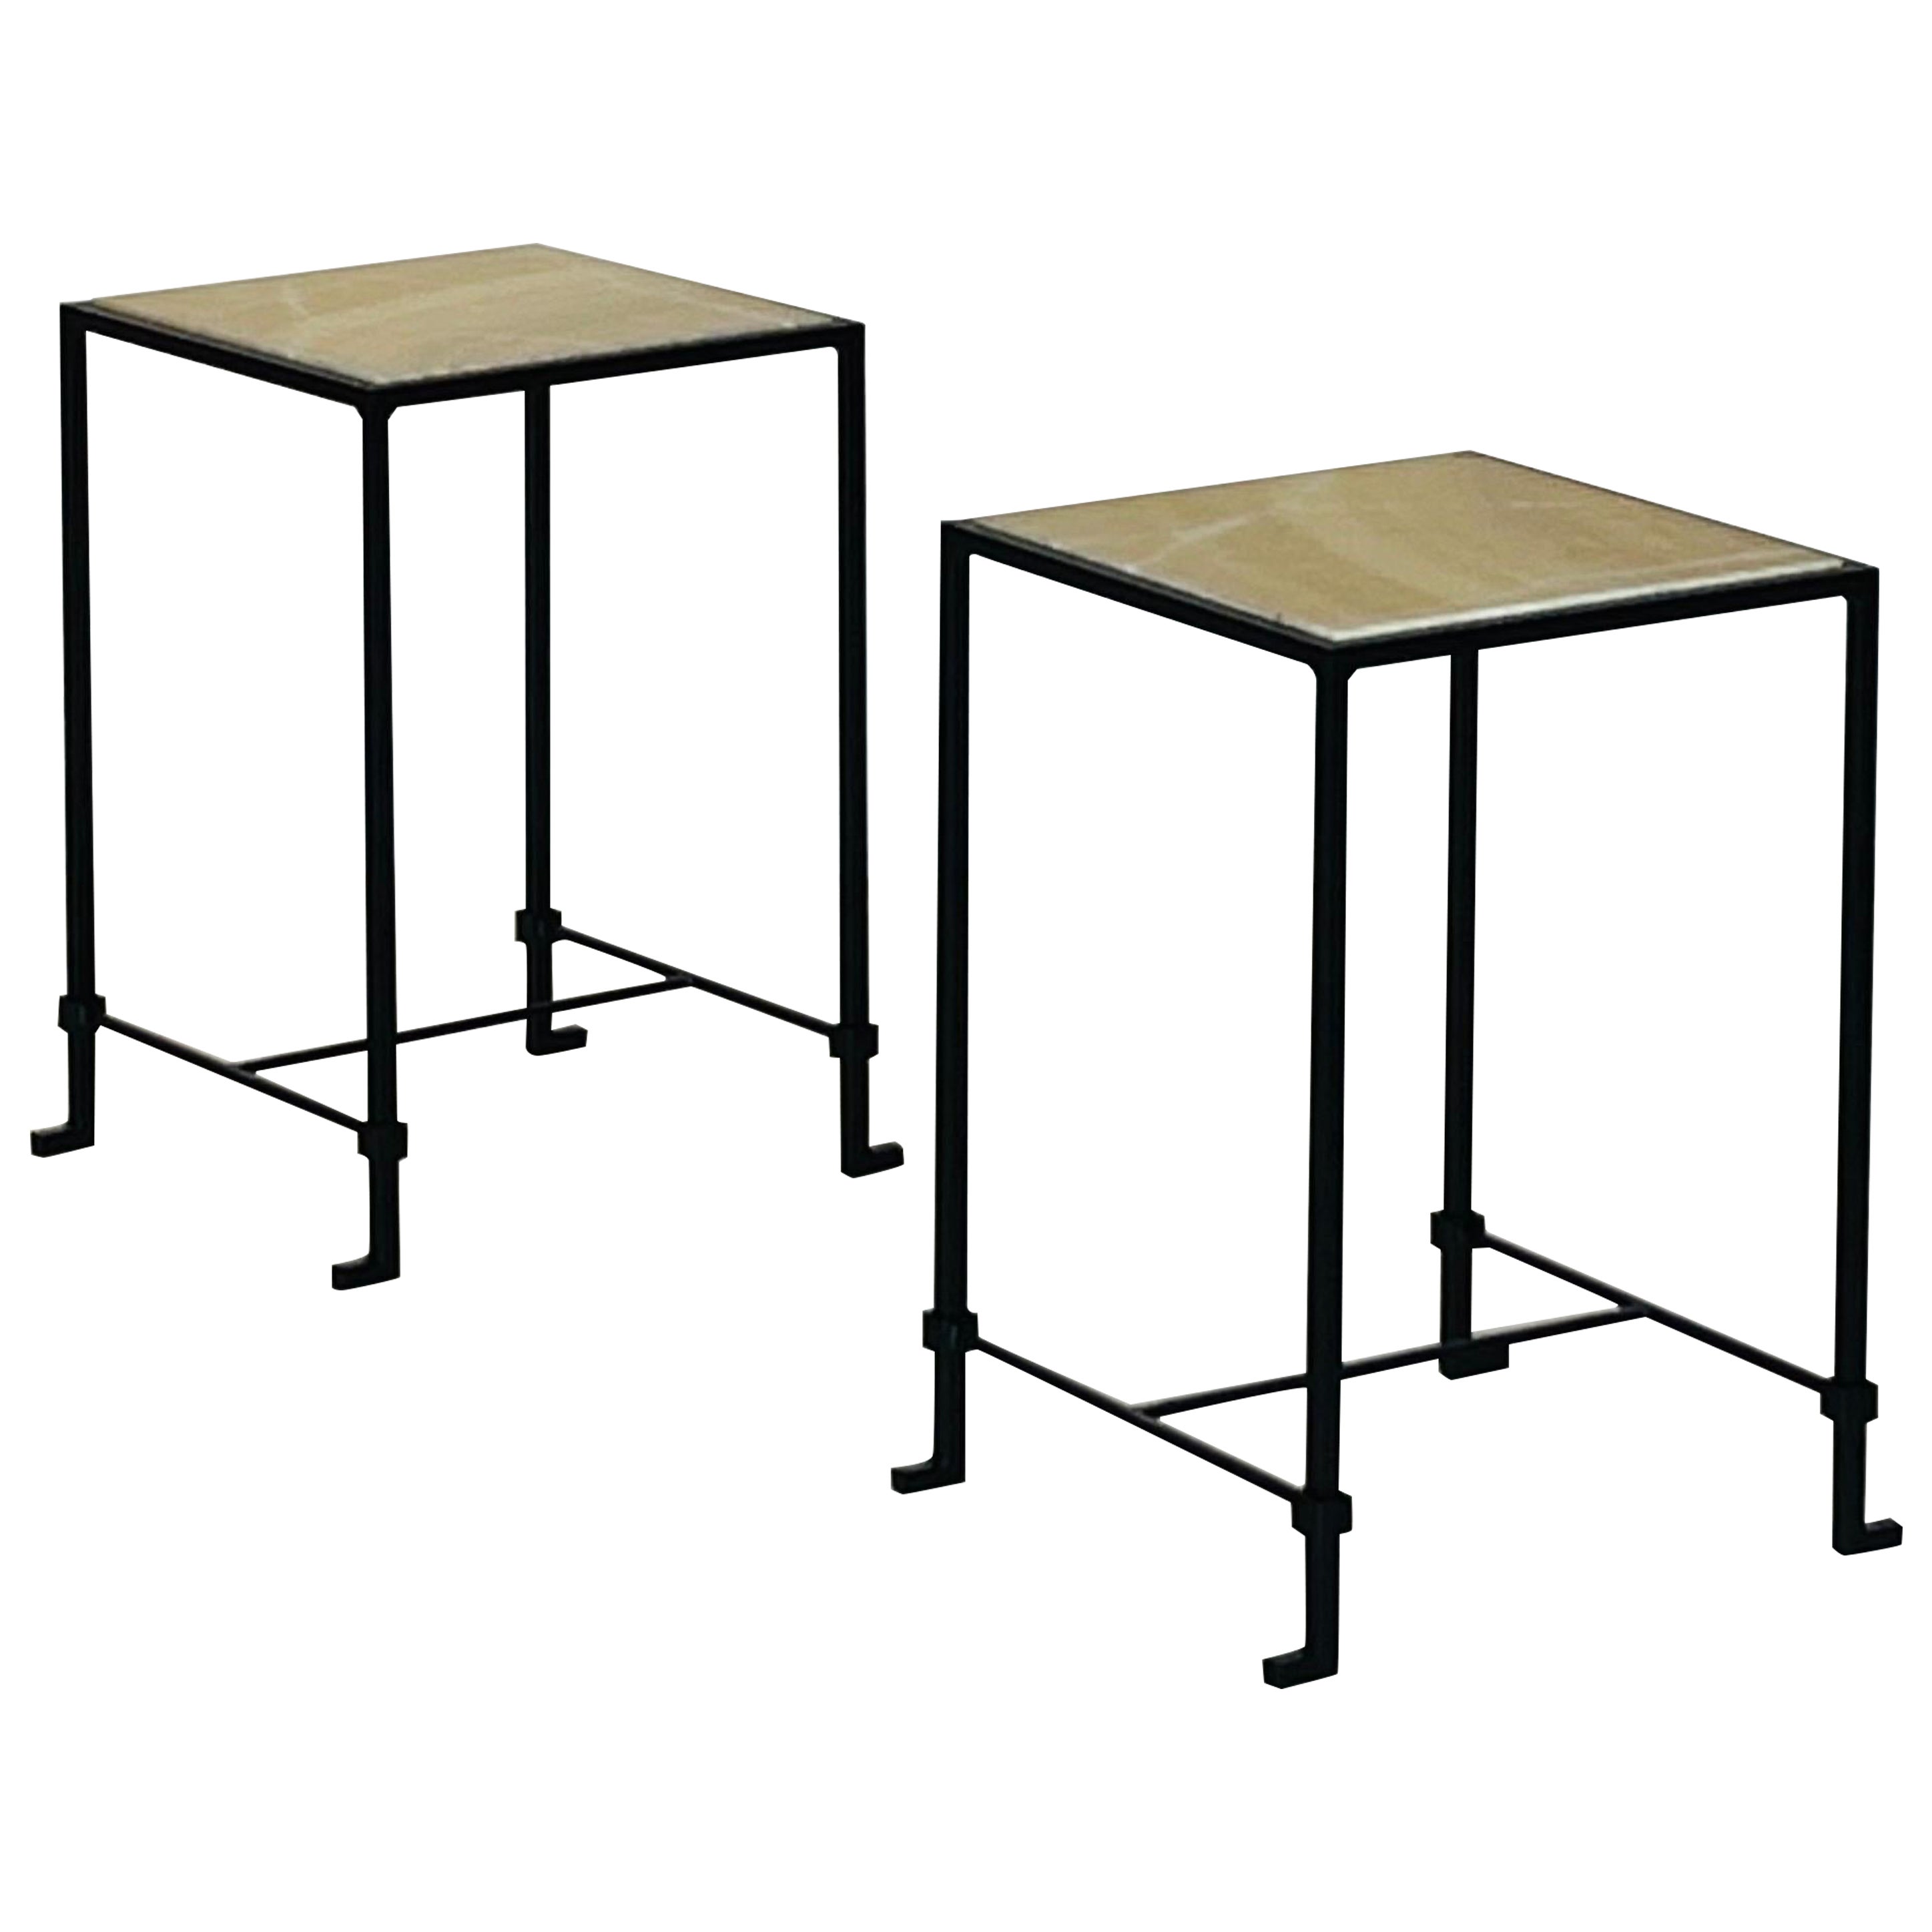 Pair of chic 'Diagramme' Onyx Drinks or Side Tables by Design Frères